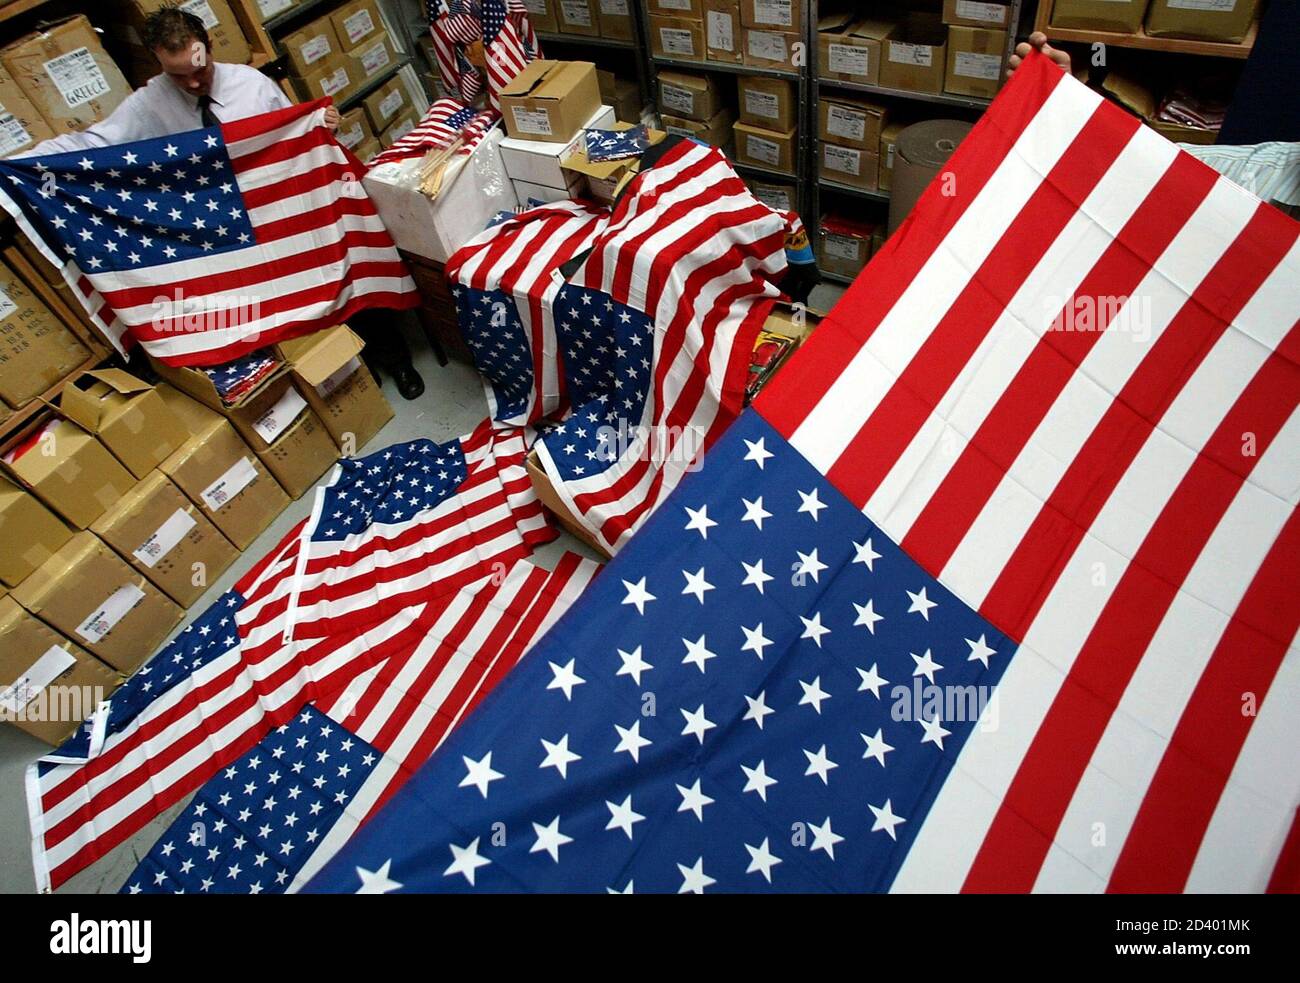 Alex Petrovic folds U.S. flags after quality checks at the Australian  distribution company 'AJ FLags' in Sydney September 9, 2002. More than  100,000 U.S. flags were sold by AJ Flags in just